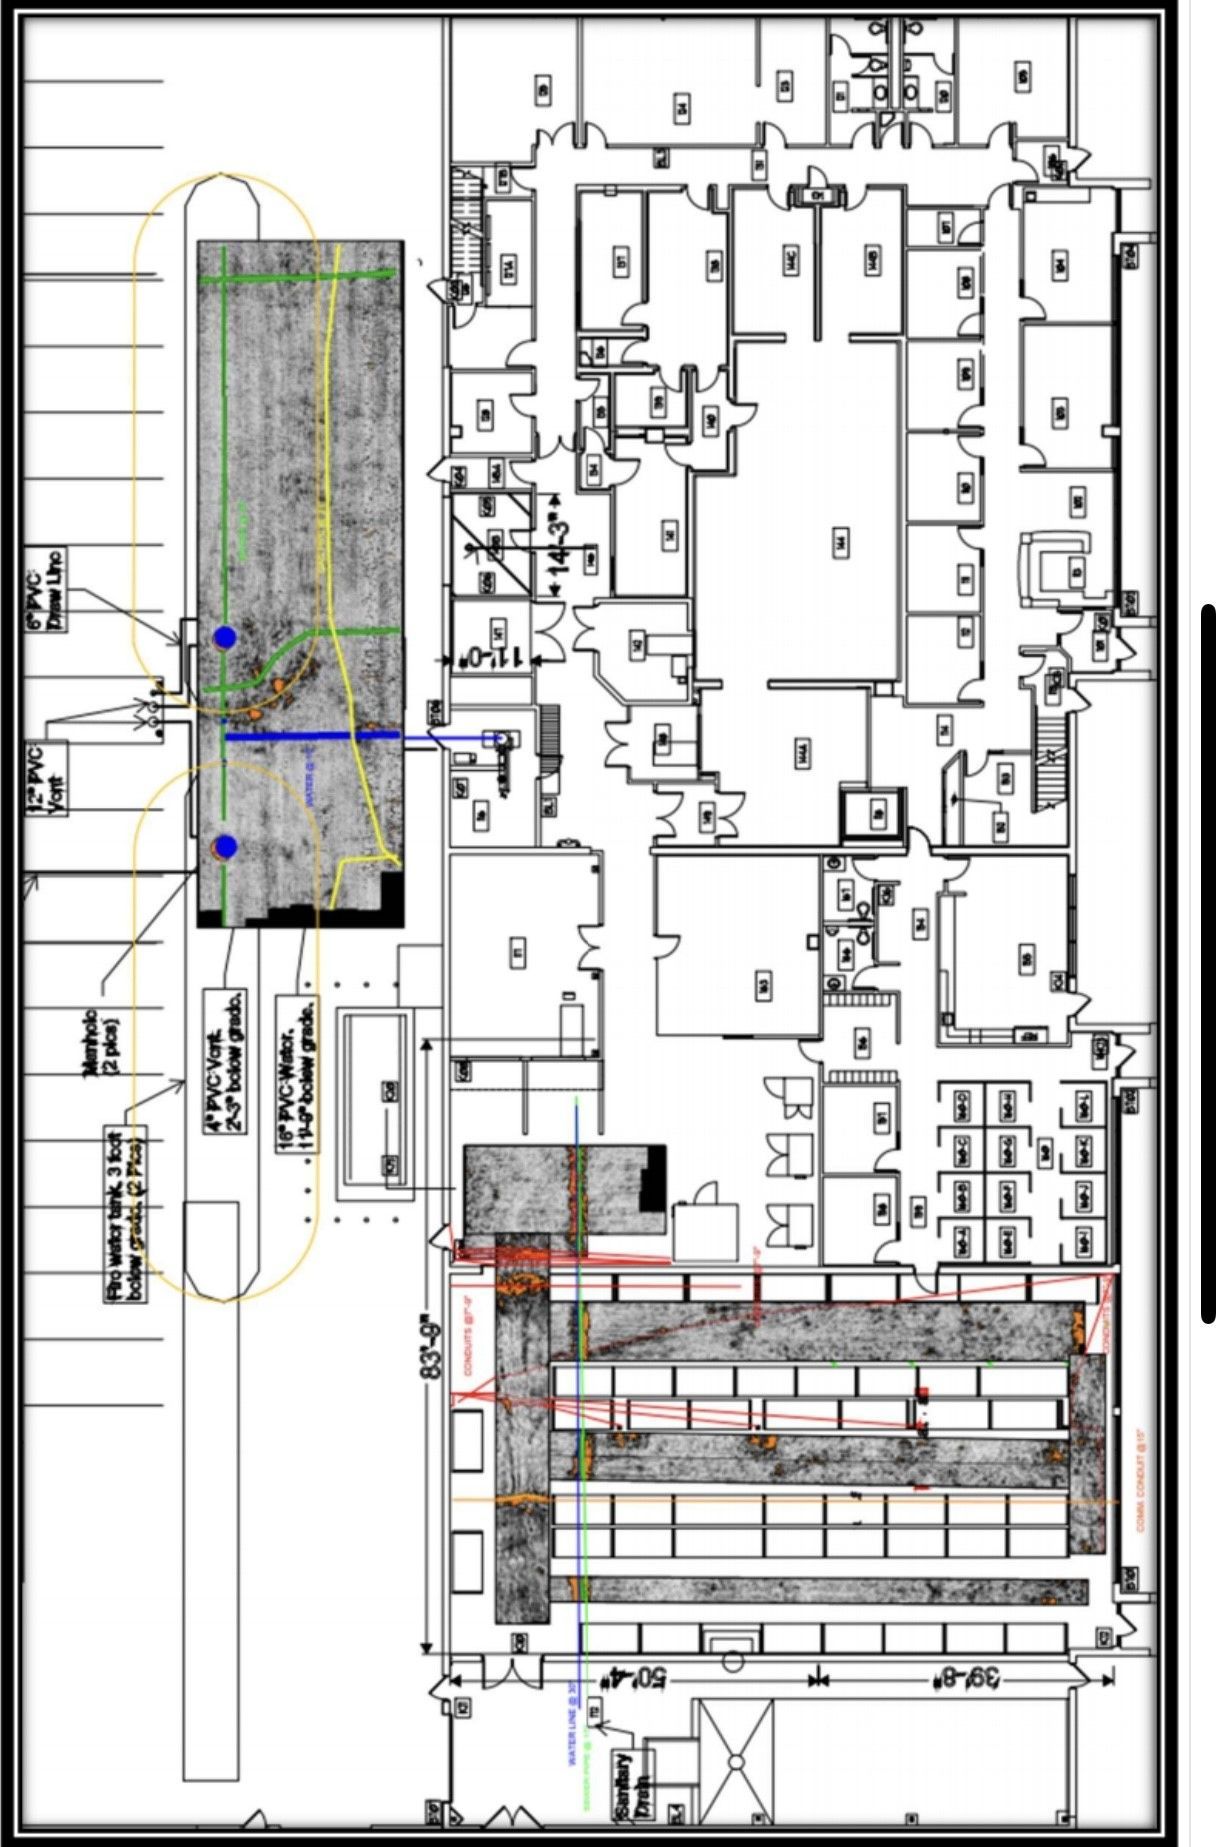 a building layout with utility lines located through underground utility locating services